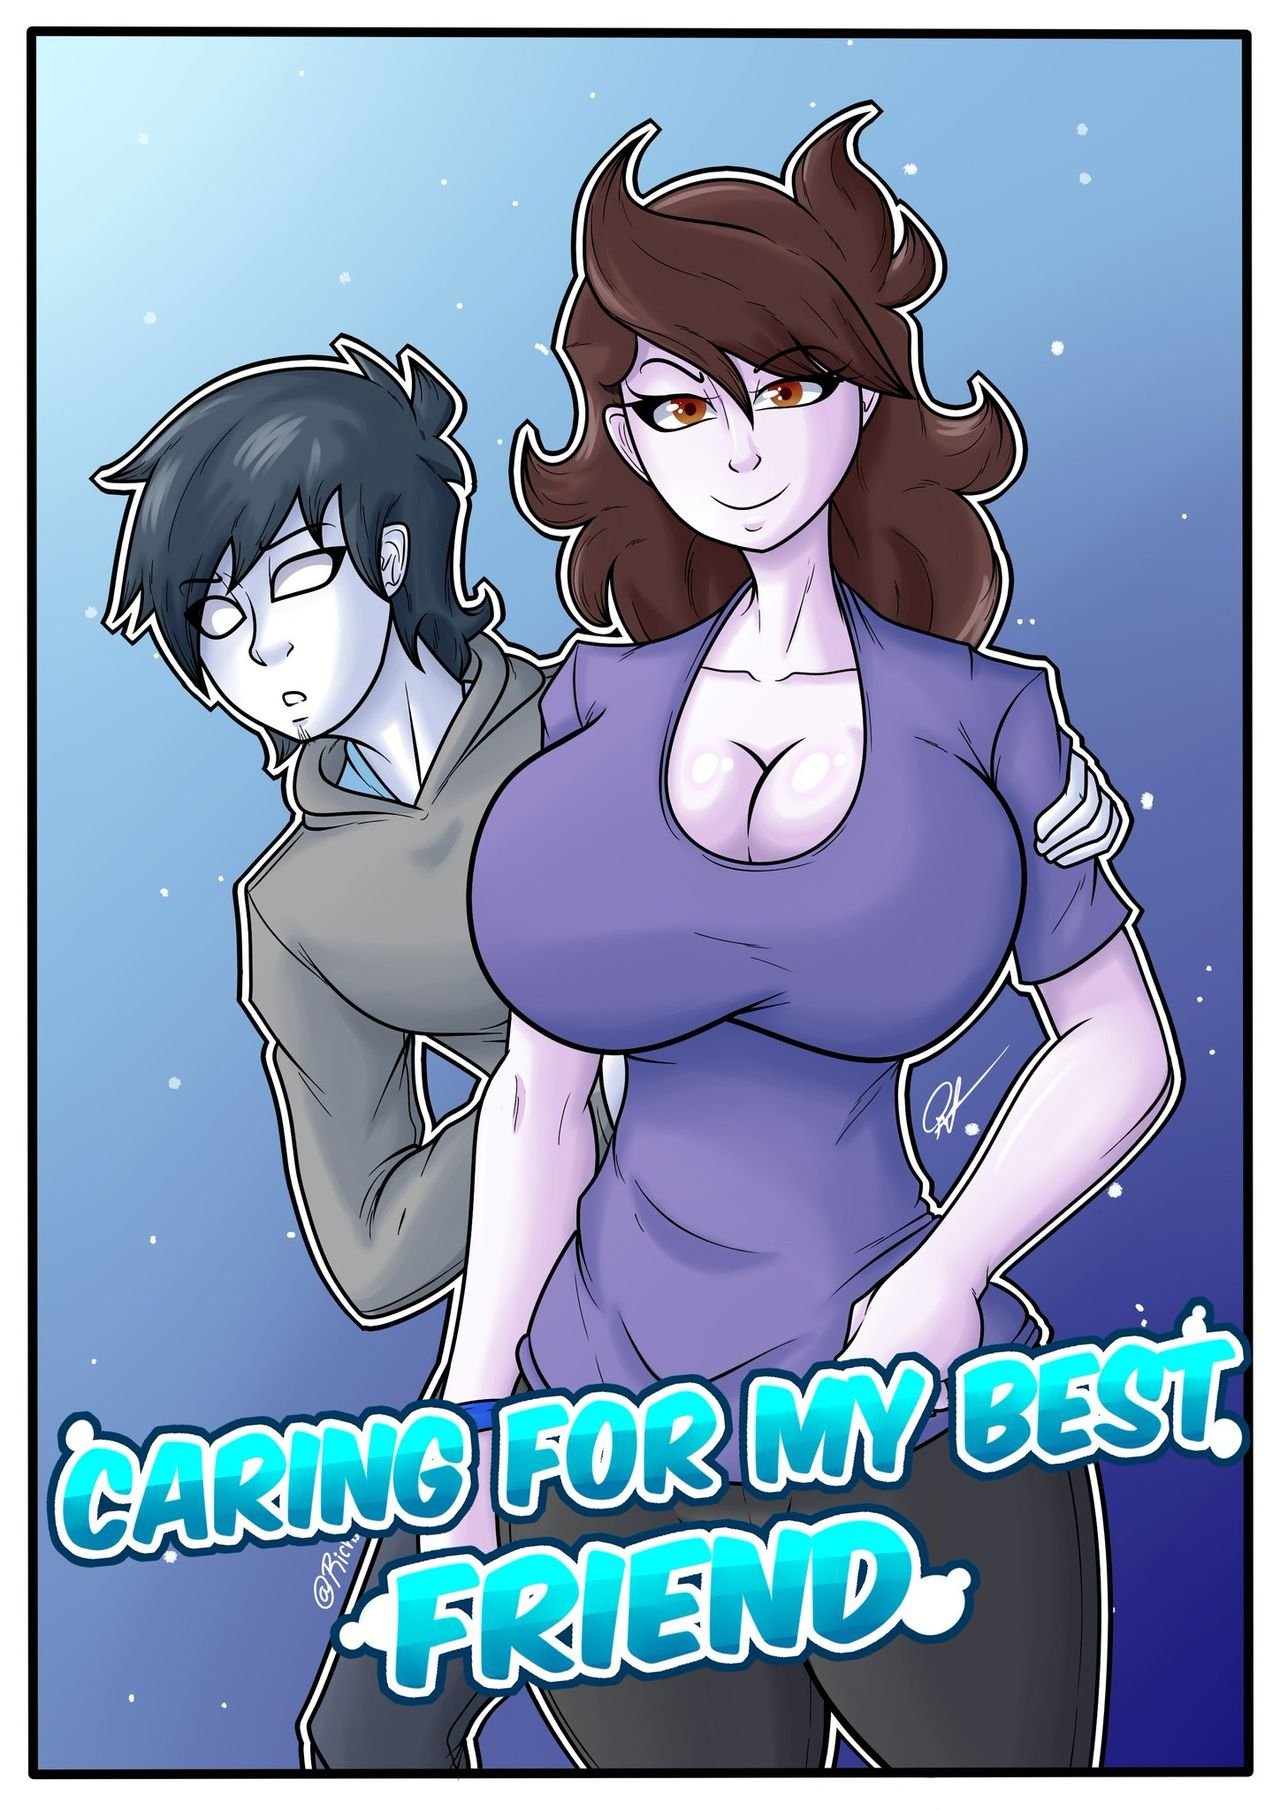 Caring For My Best Friend -Ongoing- comic porn HD Porn Comics image image